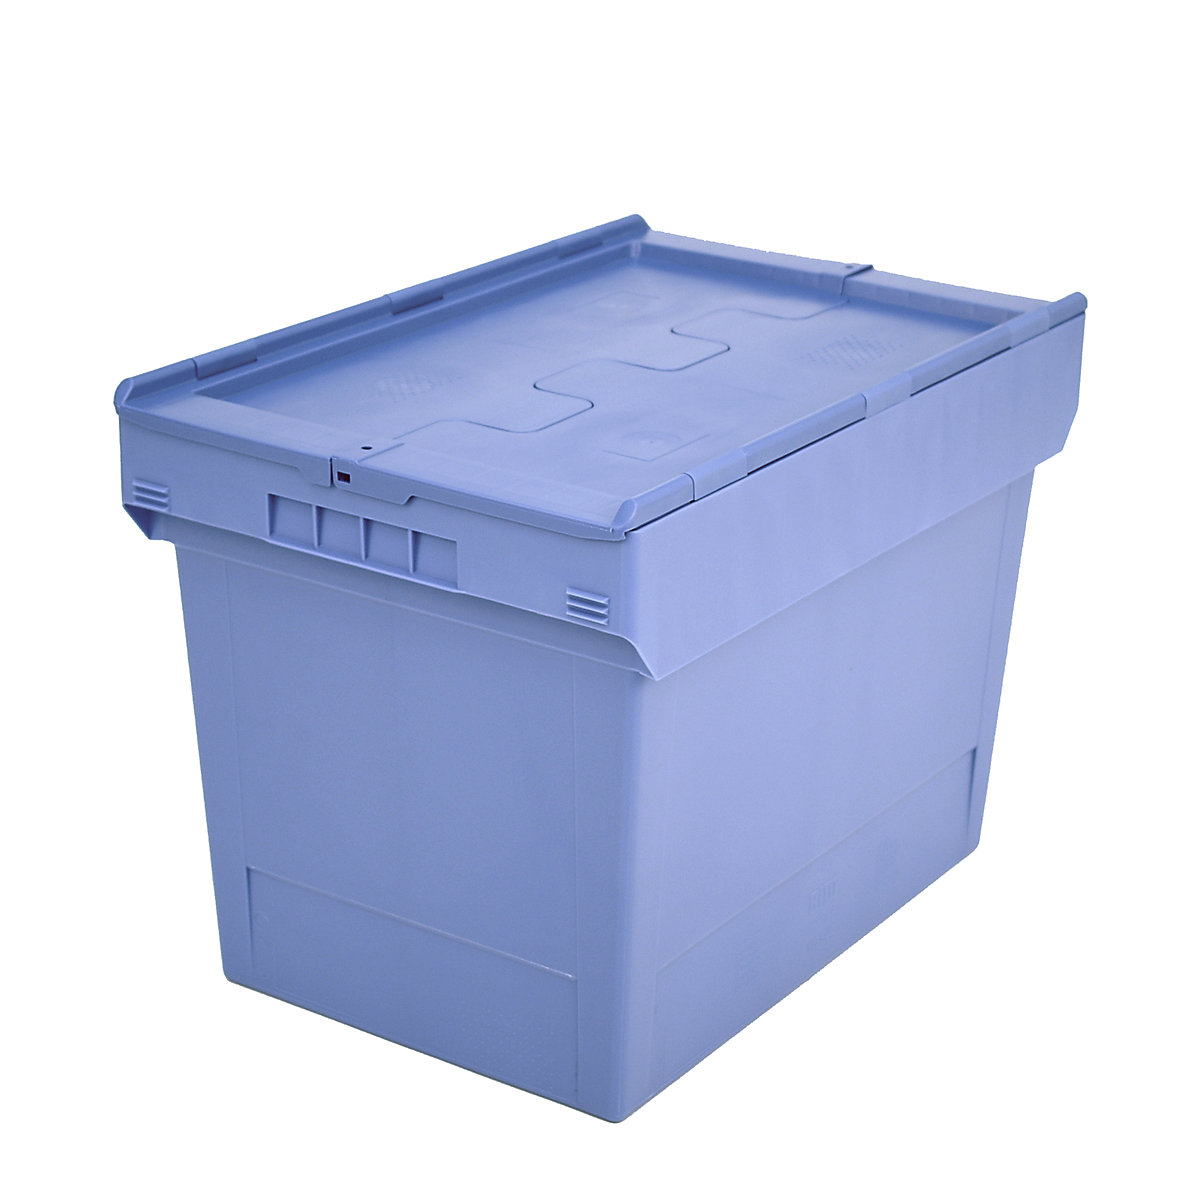 Reusable stacking container with folding lid - BITO